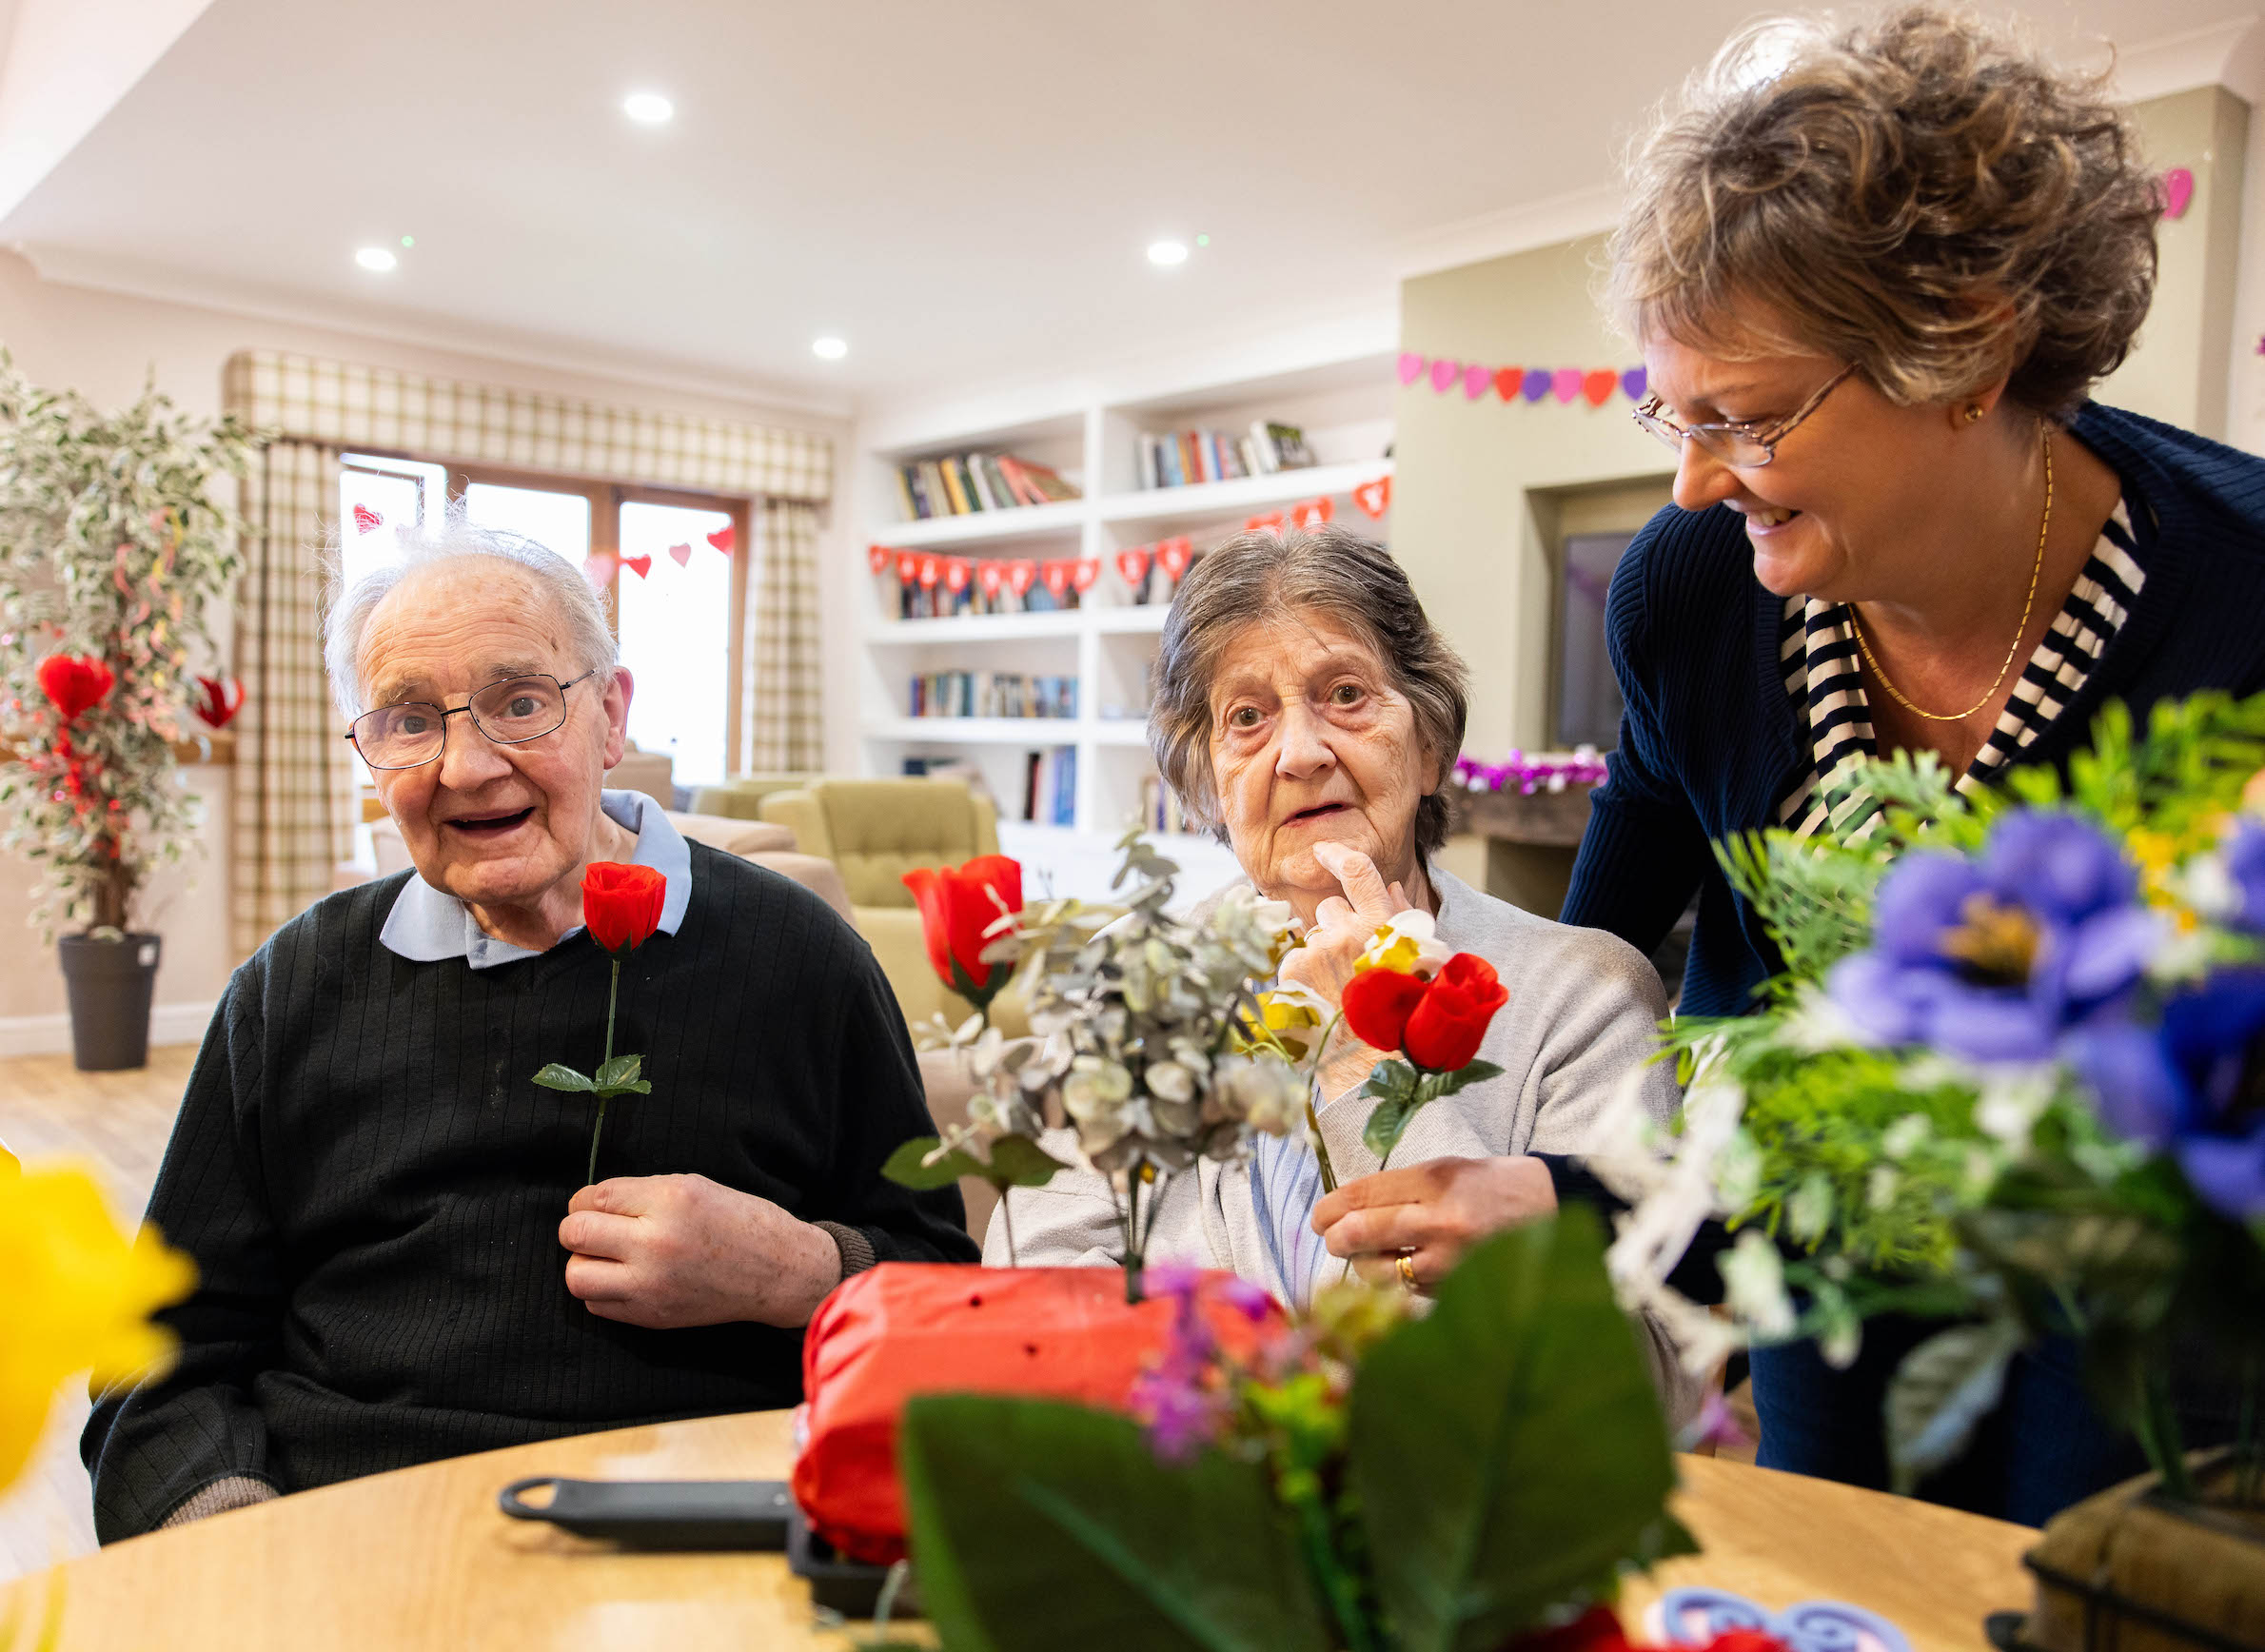 Valentine’s Day was ‘blooming lovely’ for married couple, David and Helena, at our care home